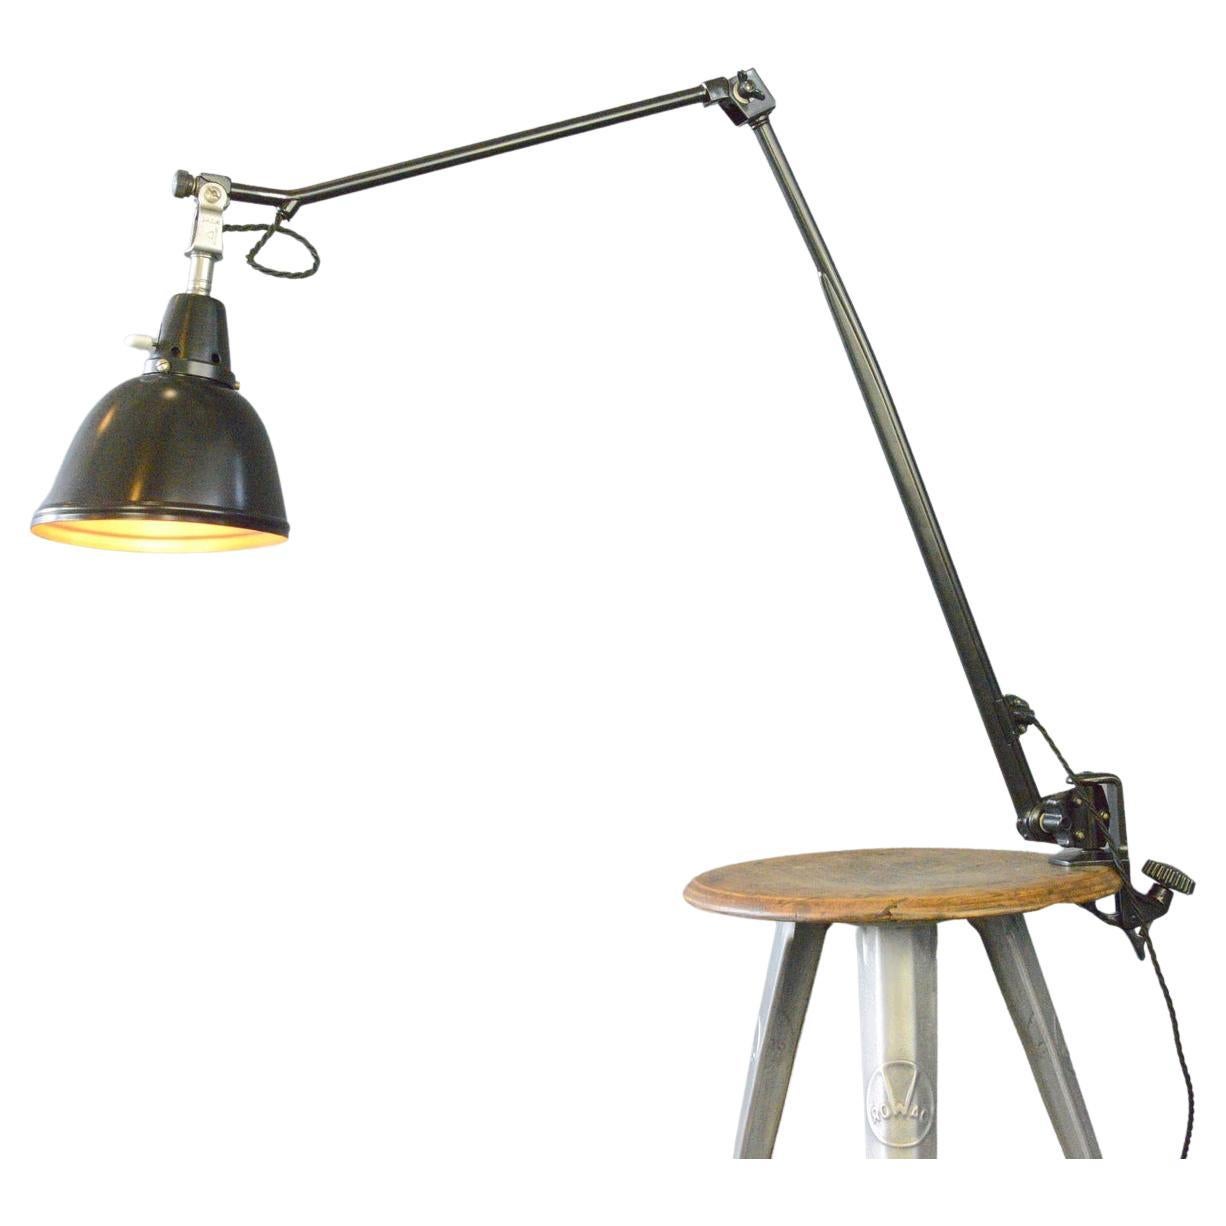 Midgard Typ 114 Table Lamp By Curt Fischer Circa 1930s For Sale